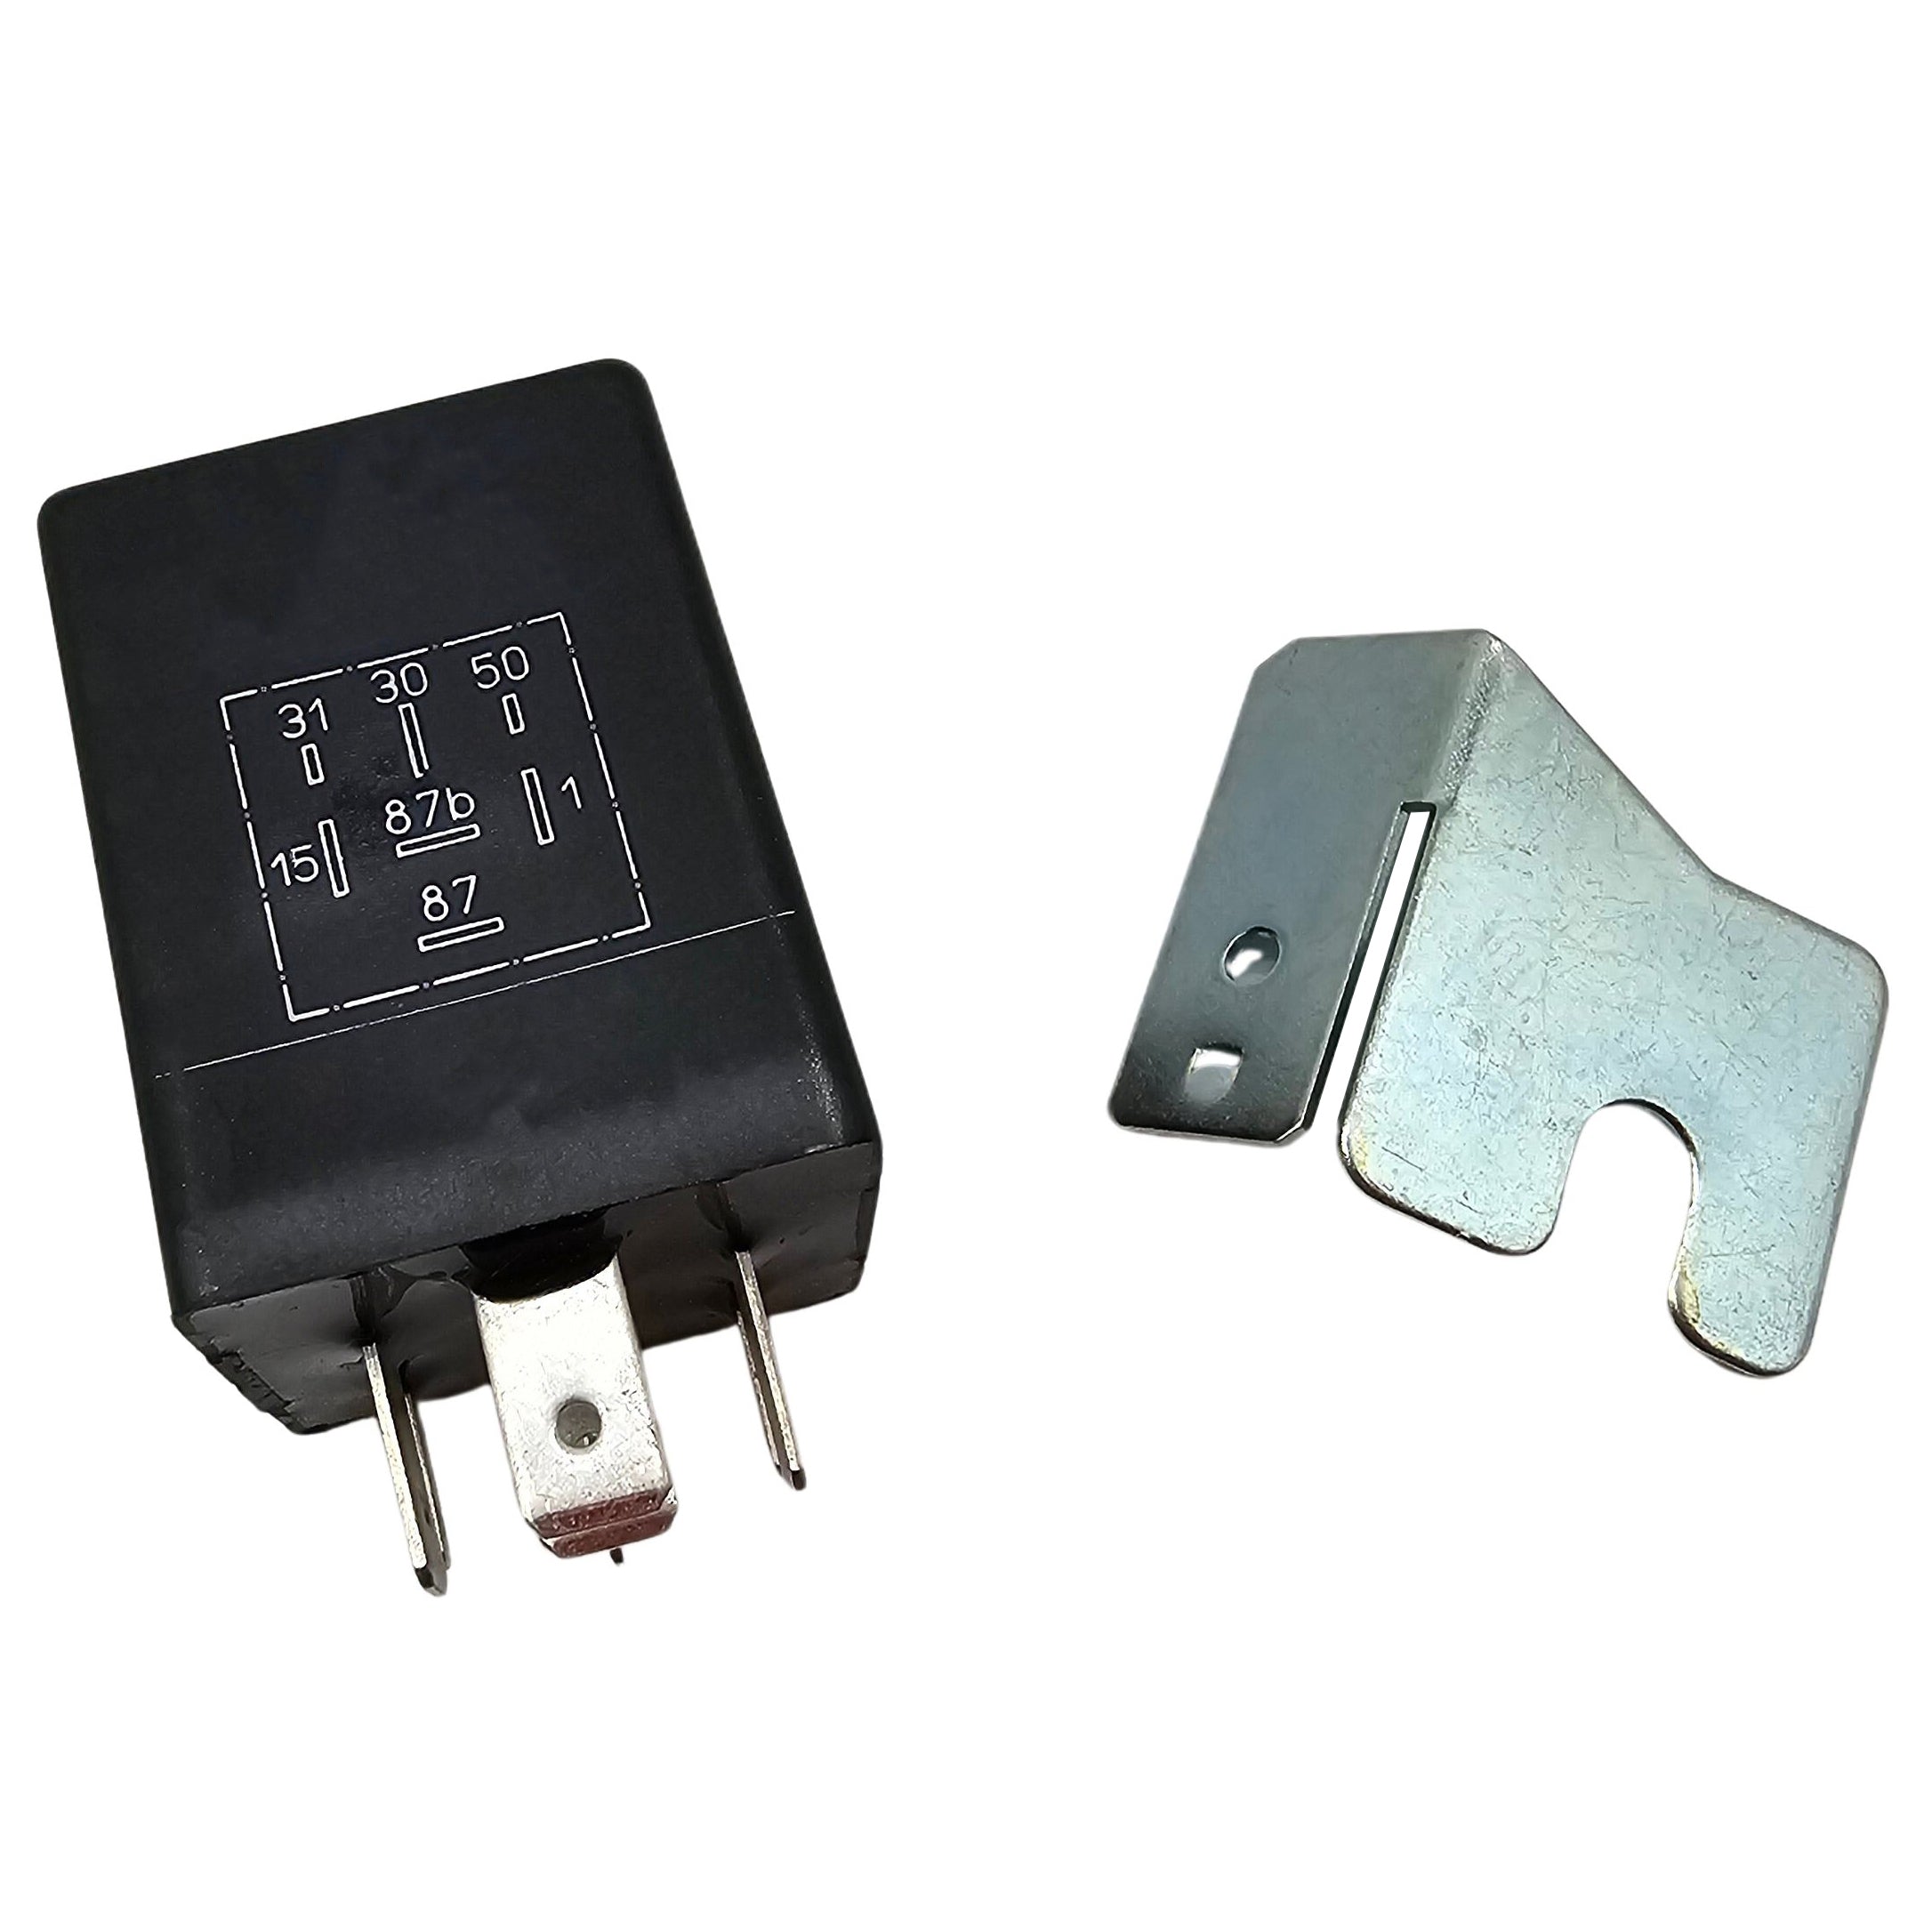 FUEL PUMP RELAY (7 PIN) for VK VL etc.